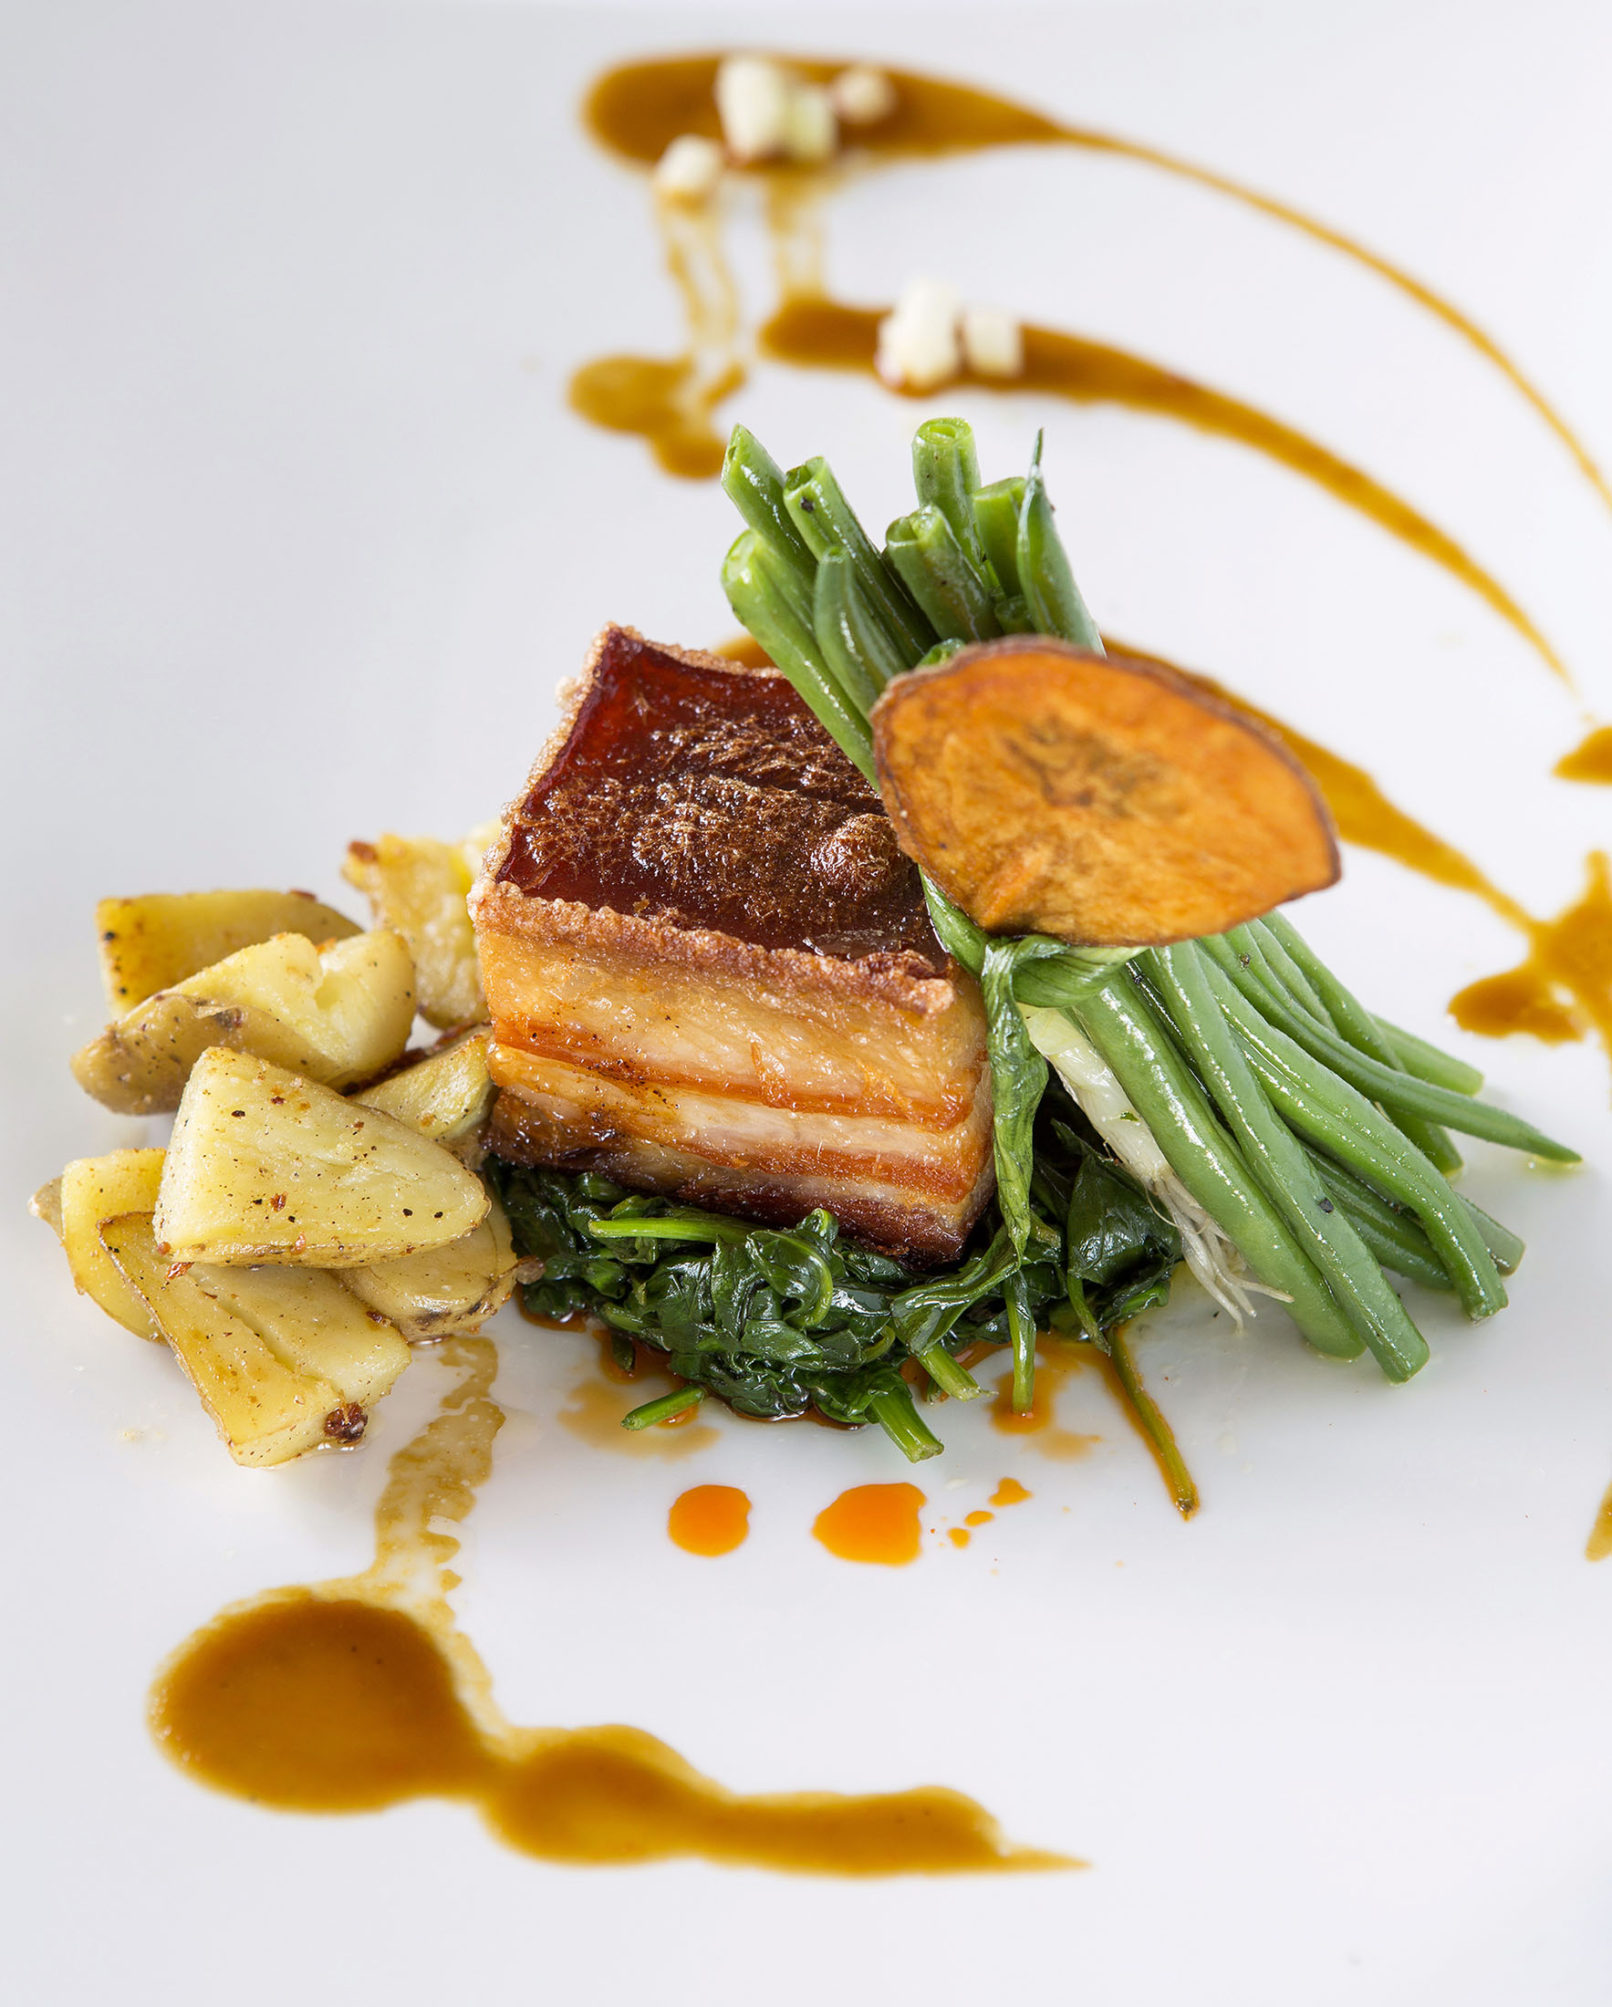 Food photography of pork belly served over greens on a white plate.